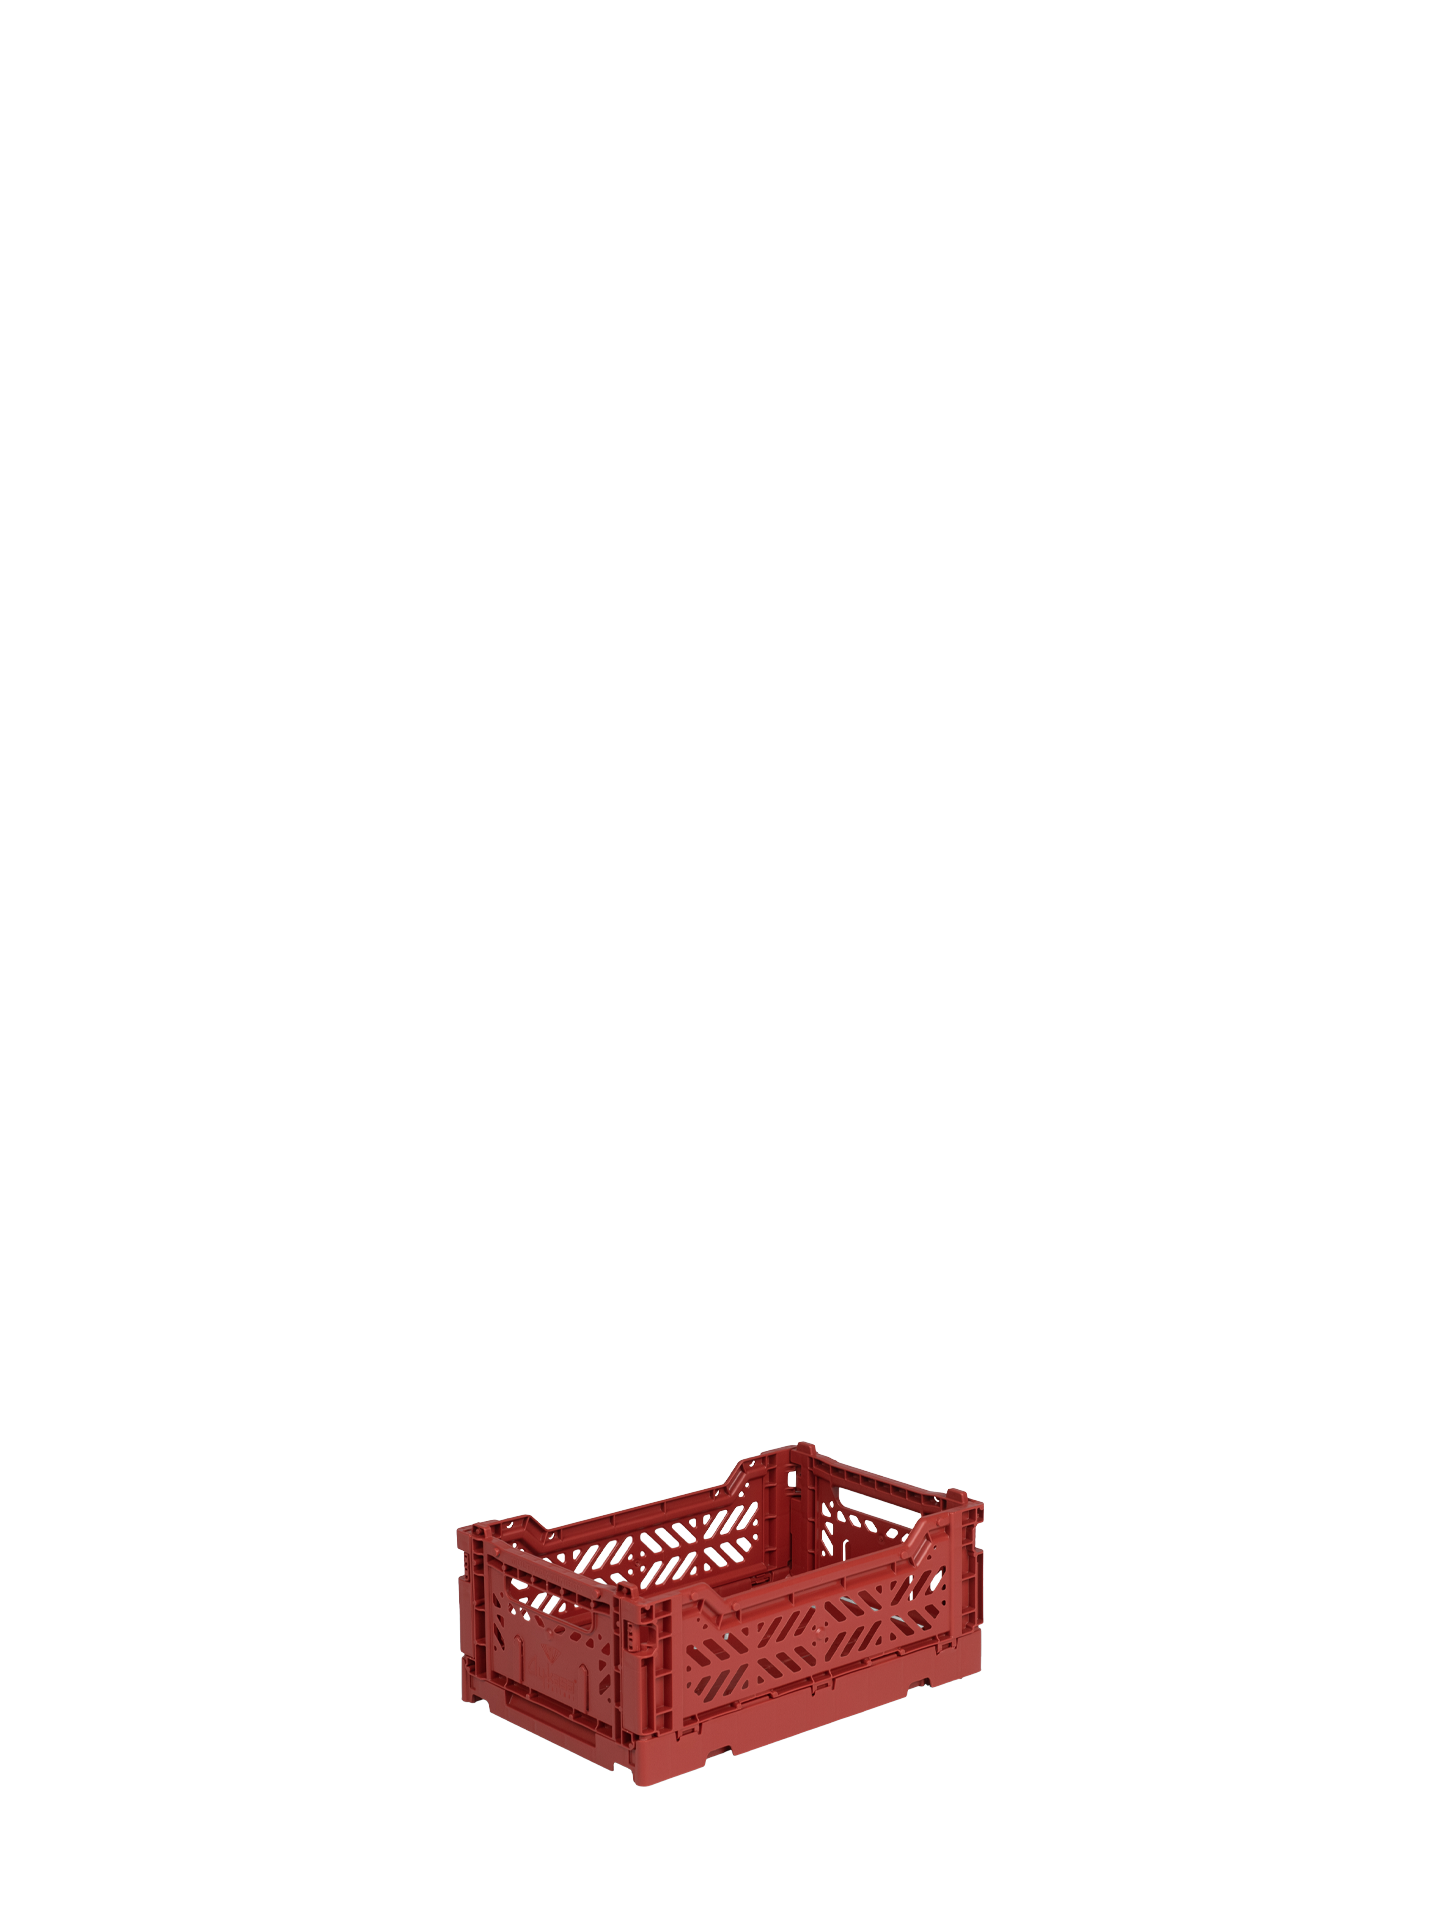 Mini Aykasa crate in tile red stacks and folds